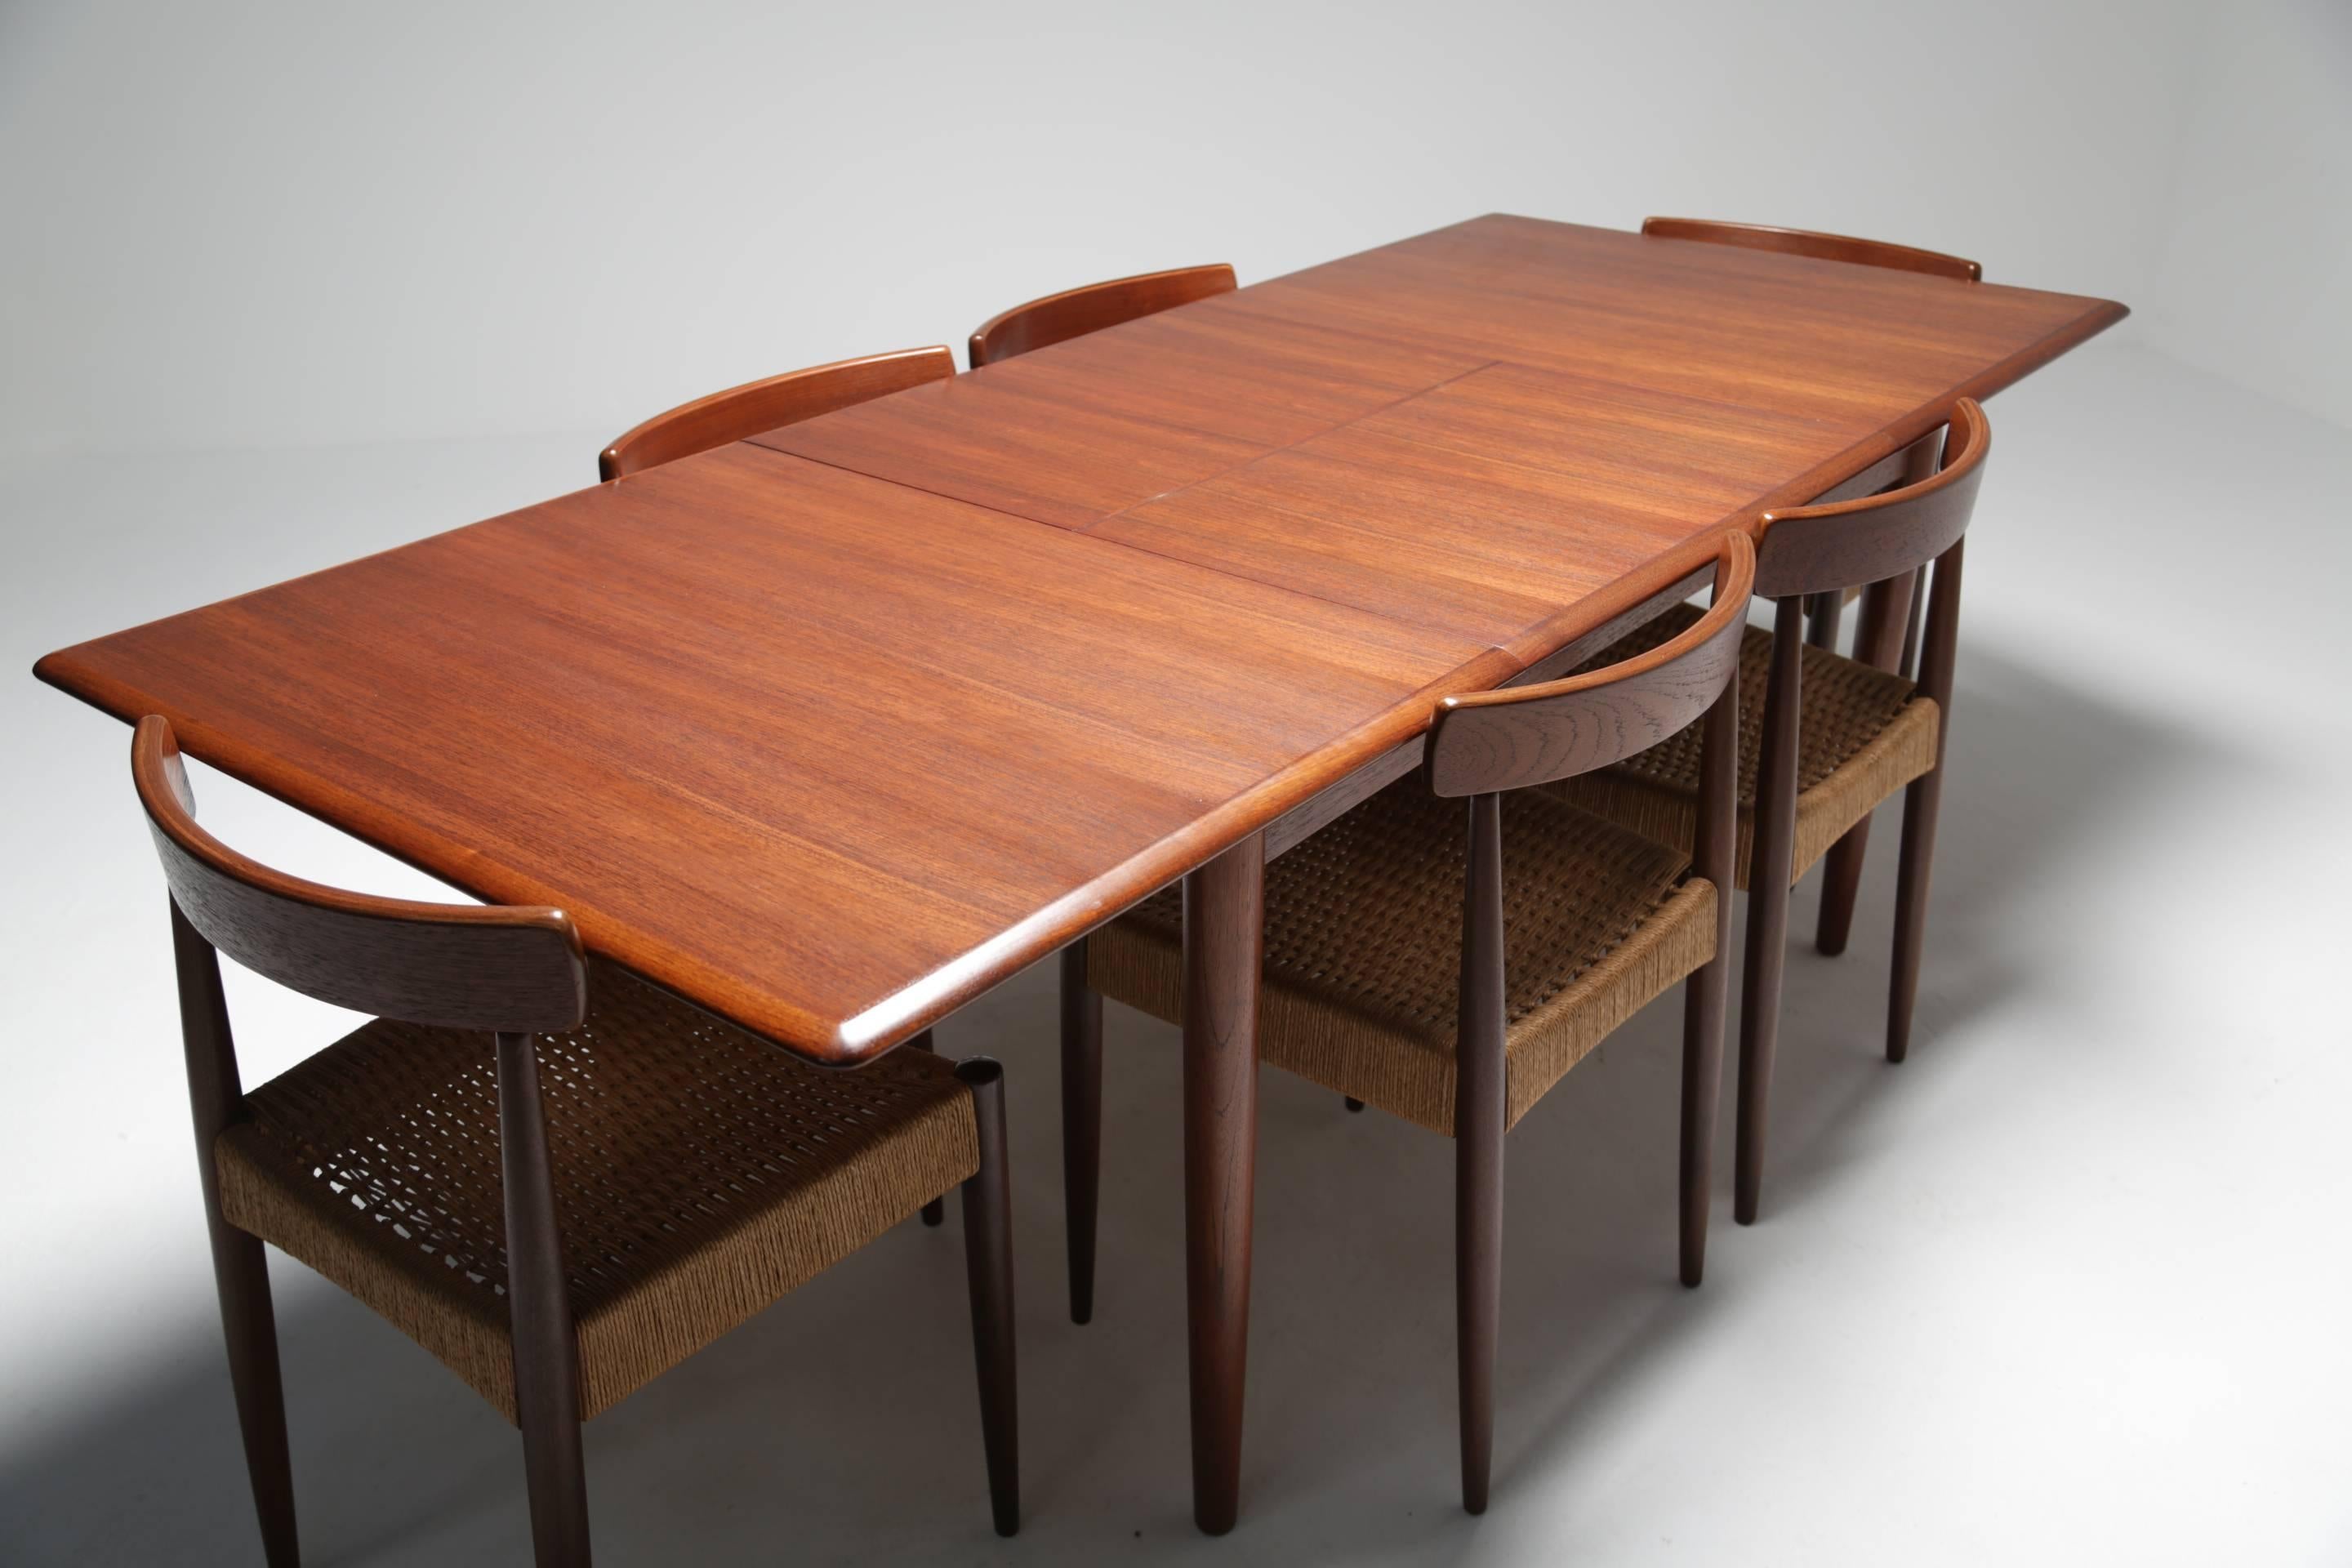 A top quality Danish modern teak dining table by Danish furniture maker Dyrlund.  Excellent manufacture with a large built in butterfly leaf extension which is cleverly folded away internally and can lift the table from a comfortable six seat to 10